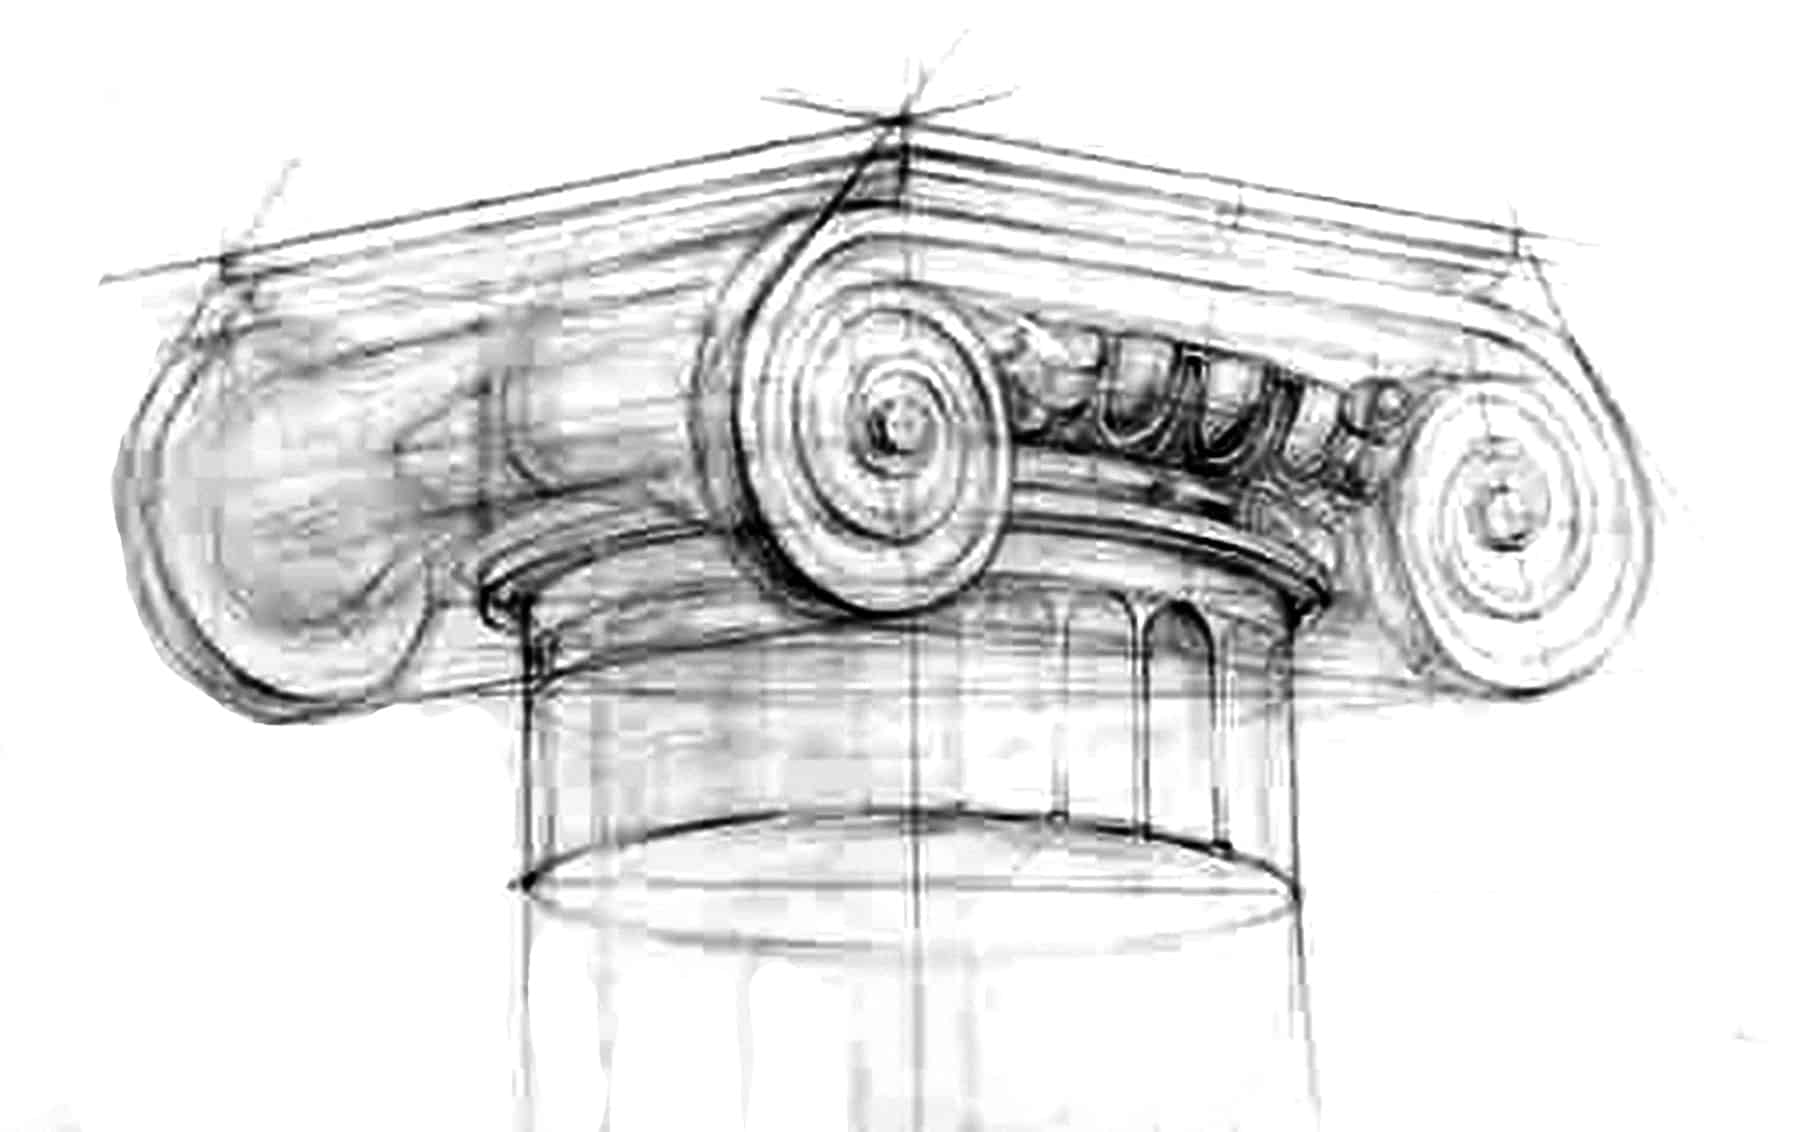 Sketch of Icon Column from the Capital Campaign